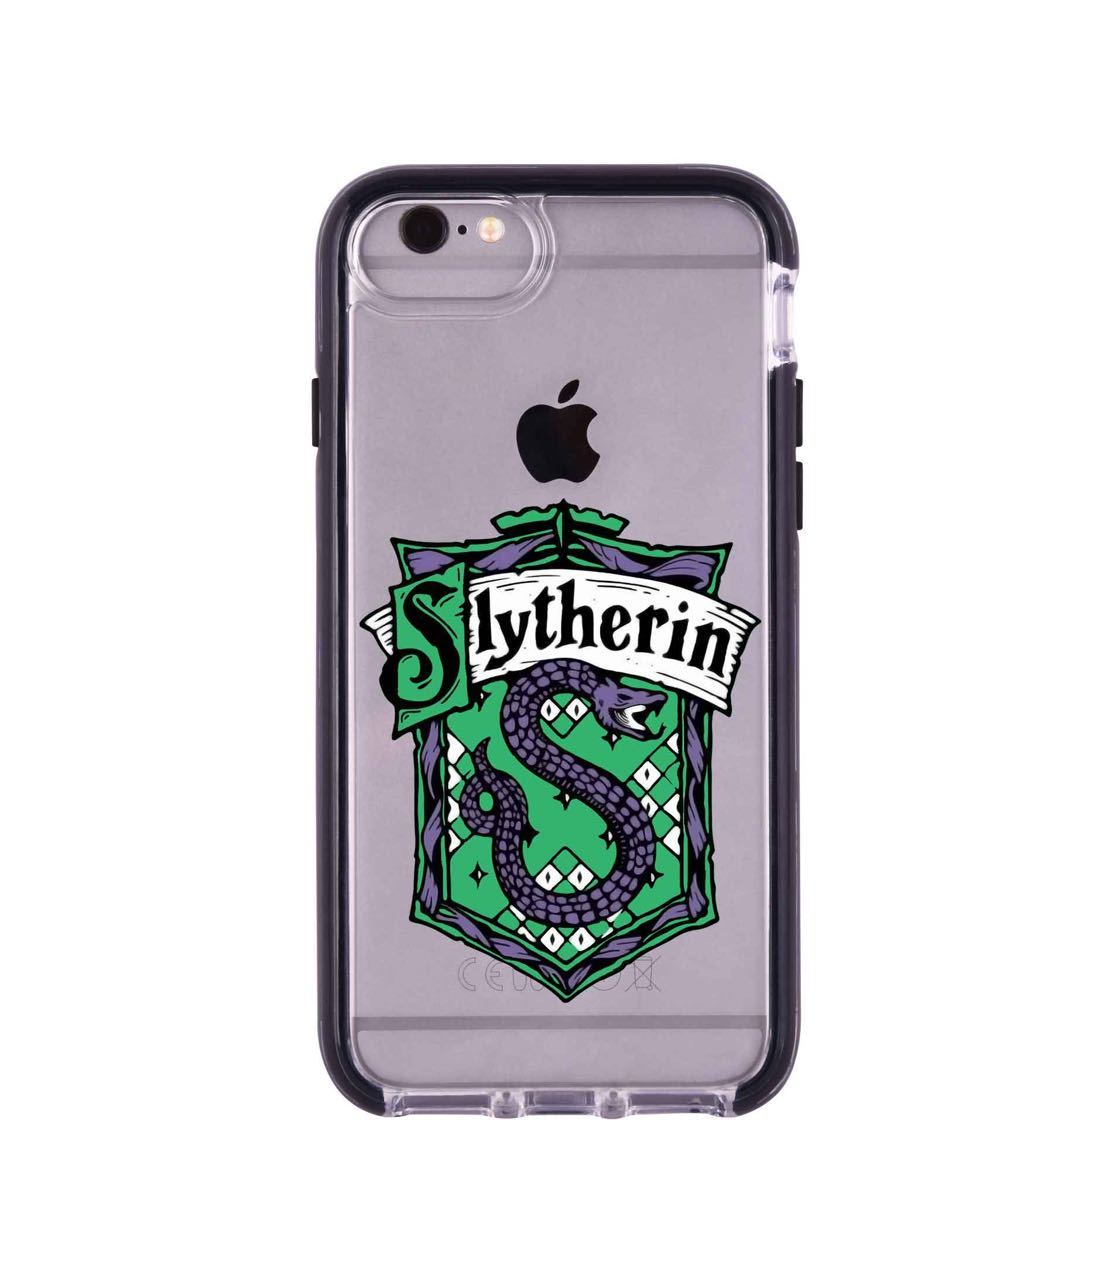 Crest Slytherin - Extreme Phone Case for iPhone 6S